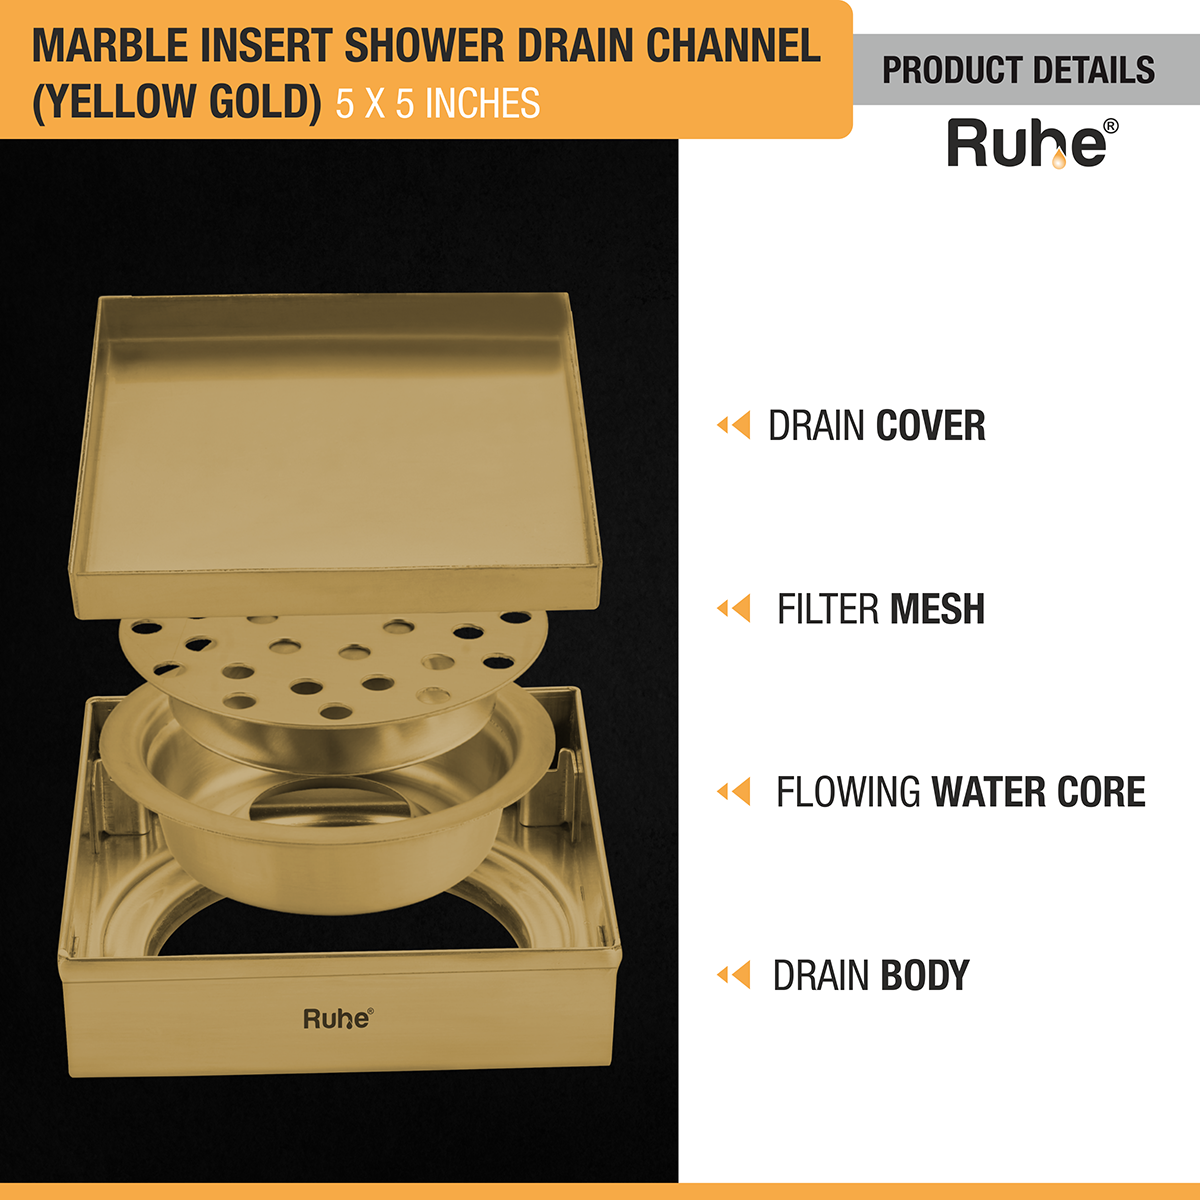 Marble Insert Shower Drain Channel (5 x 5 Inches) YELLOW GOLD PVD Coated with drain cover, filter mesh, drain body